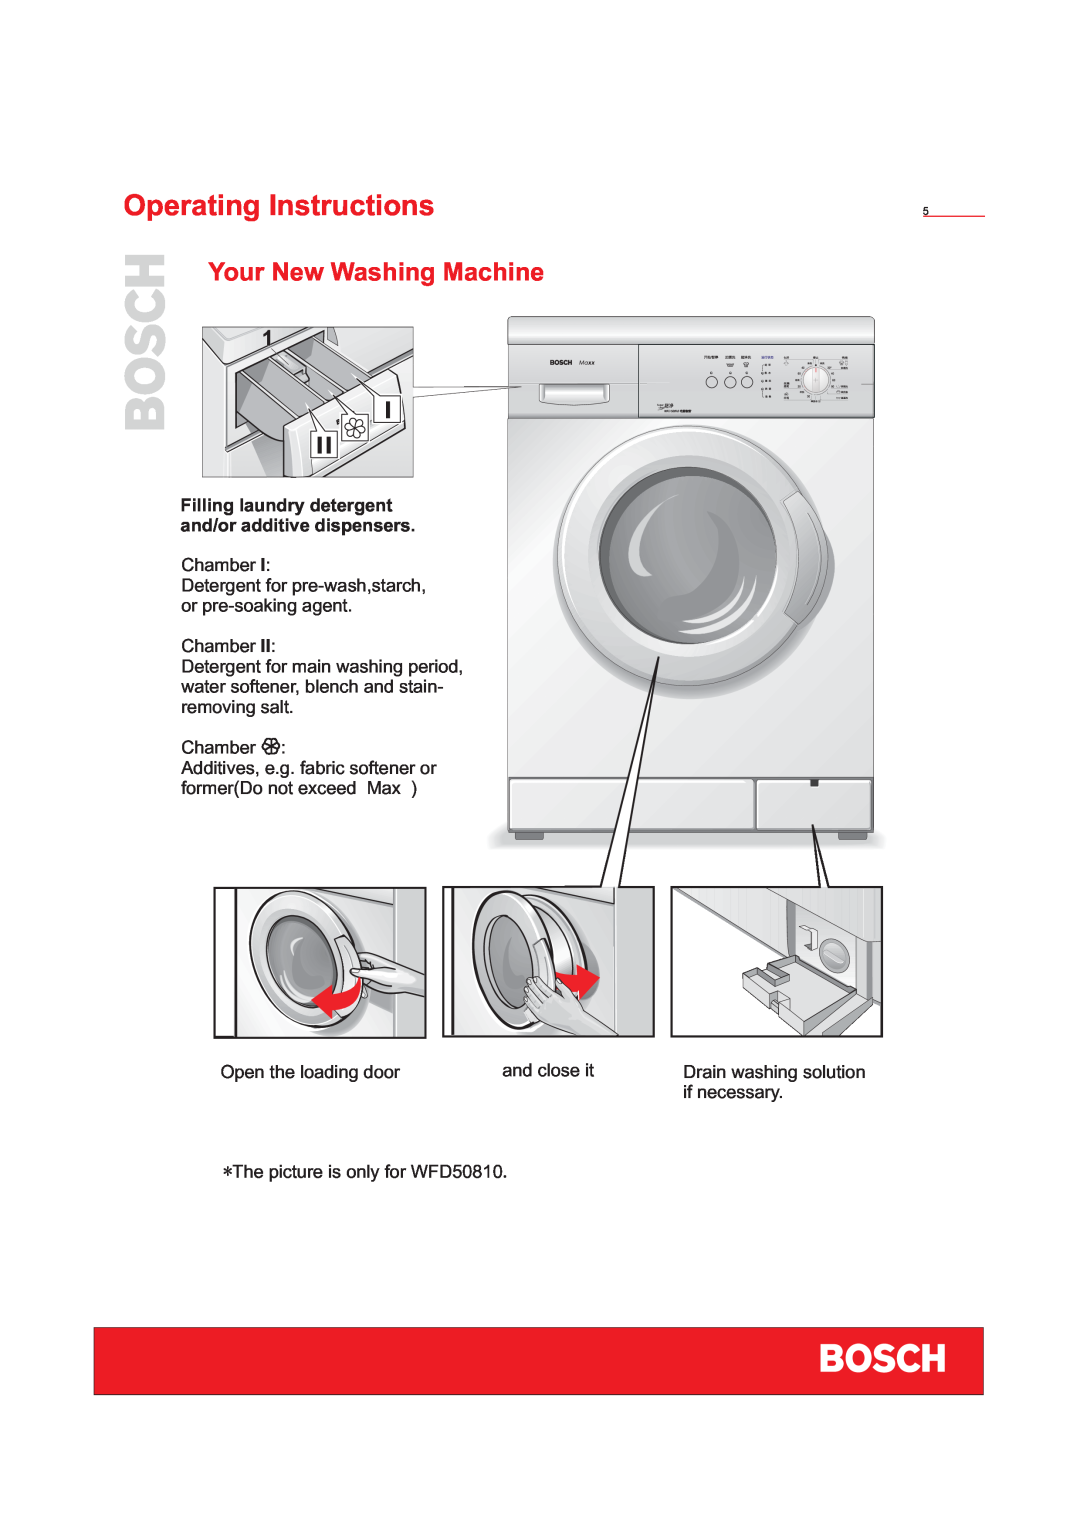 Bosch Appliances WFD50818 installation instructions Your New Washing Machine, Operating Instructions 